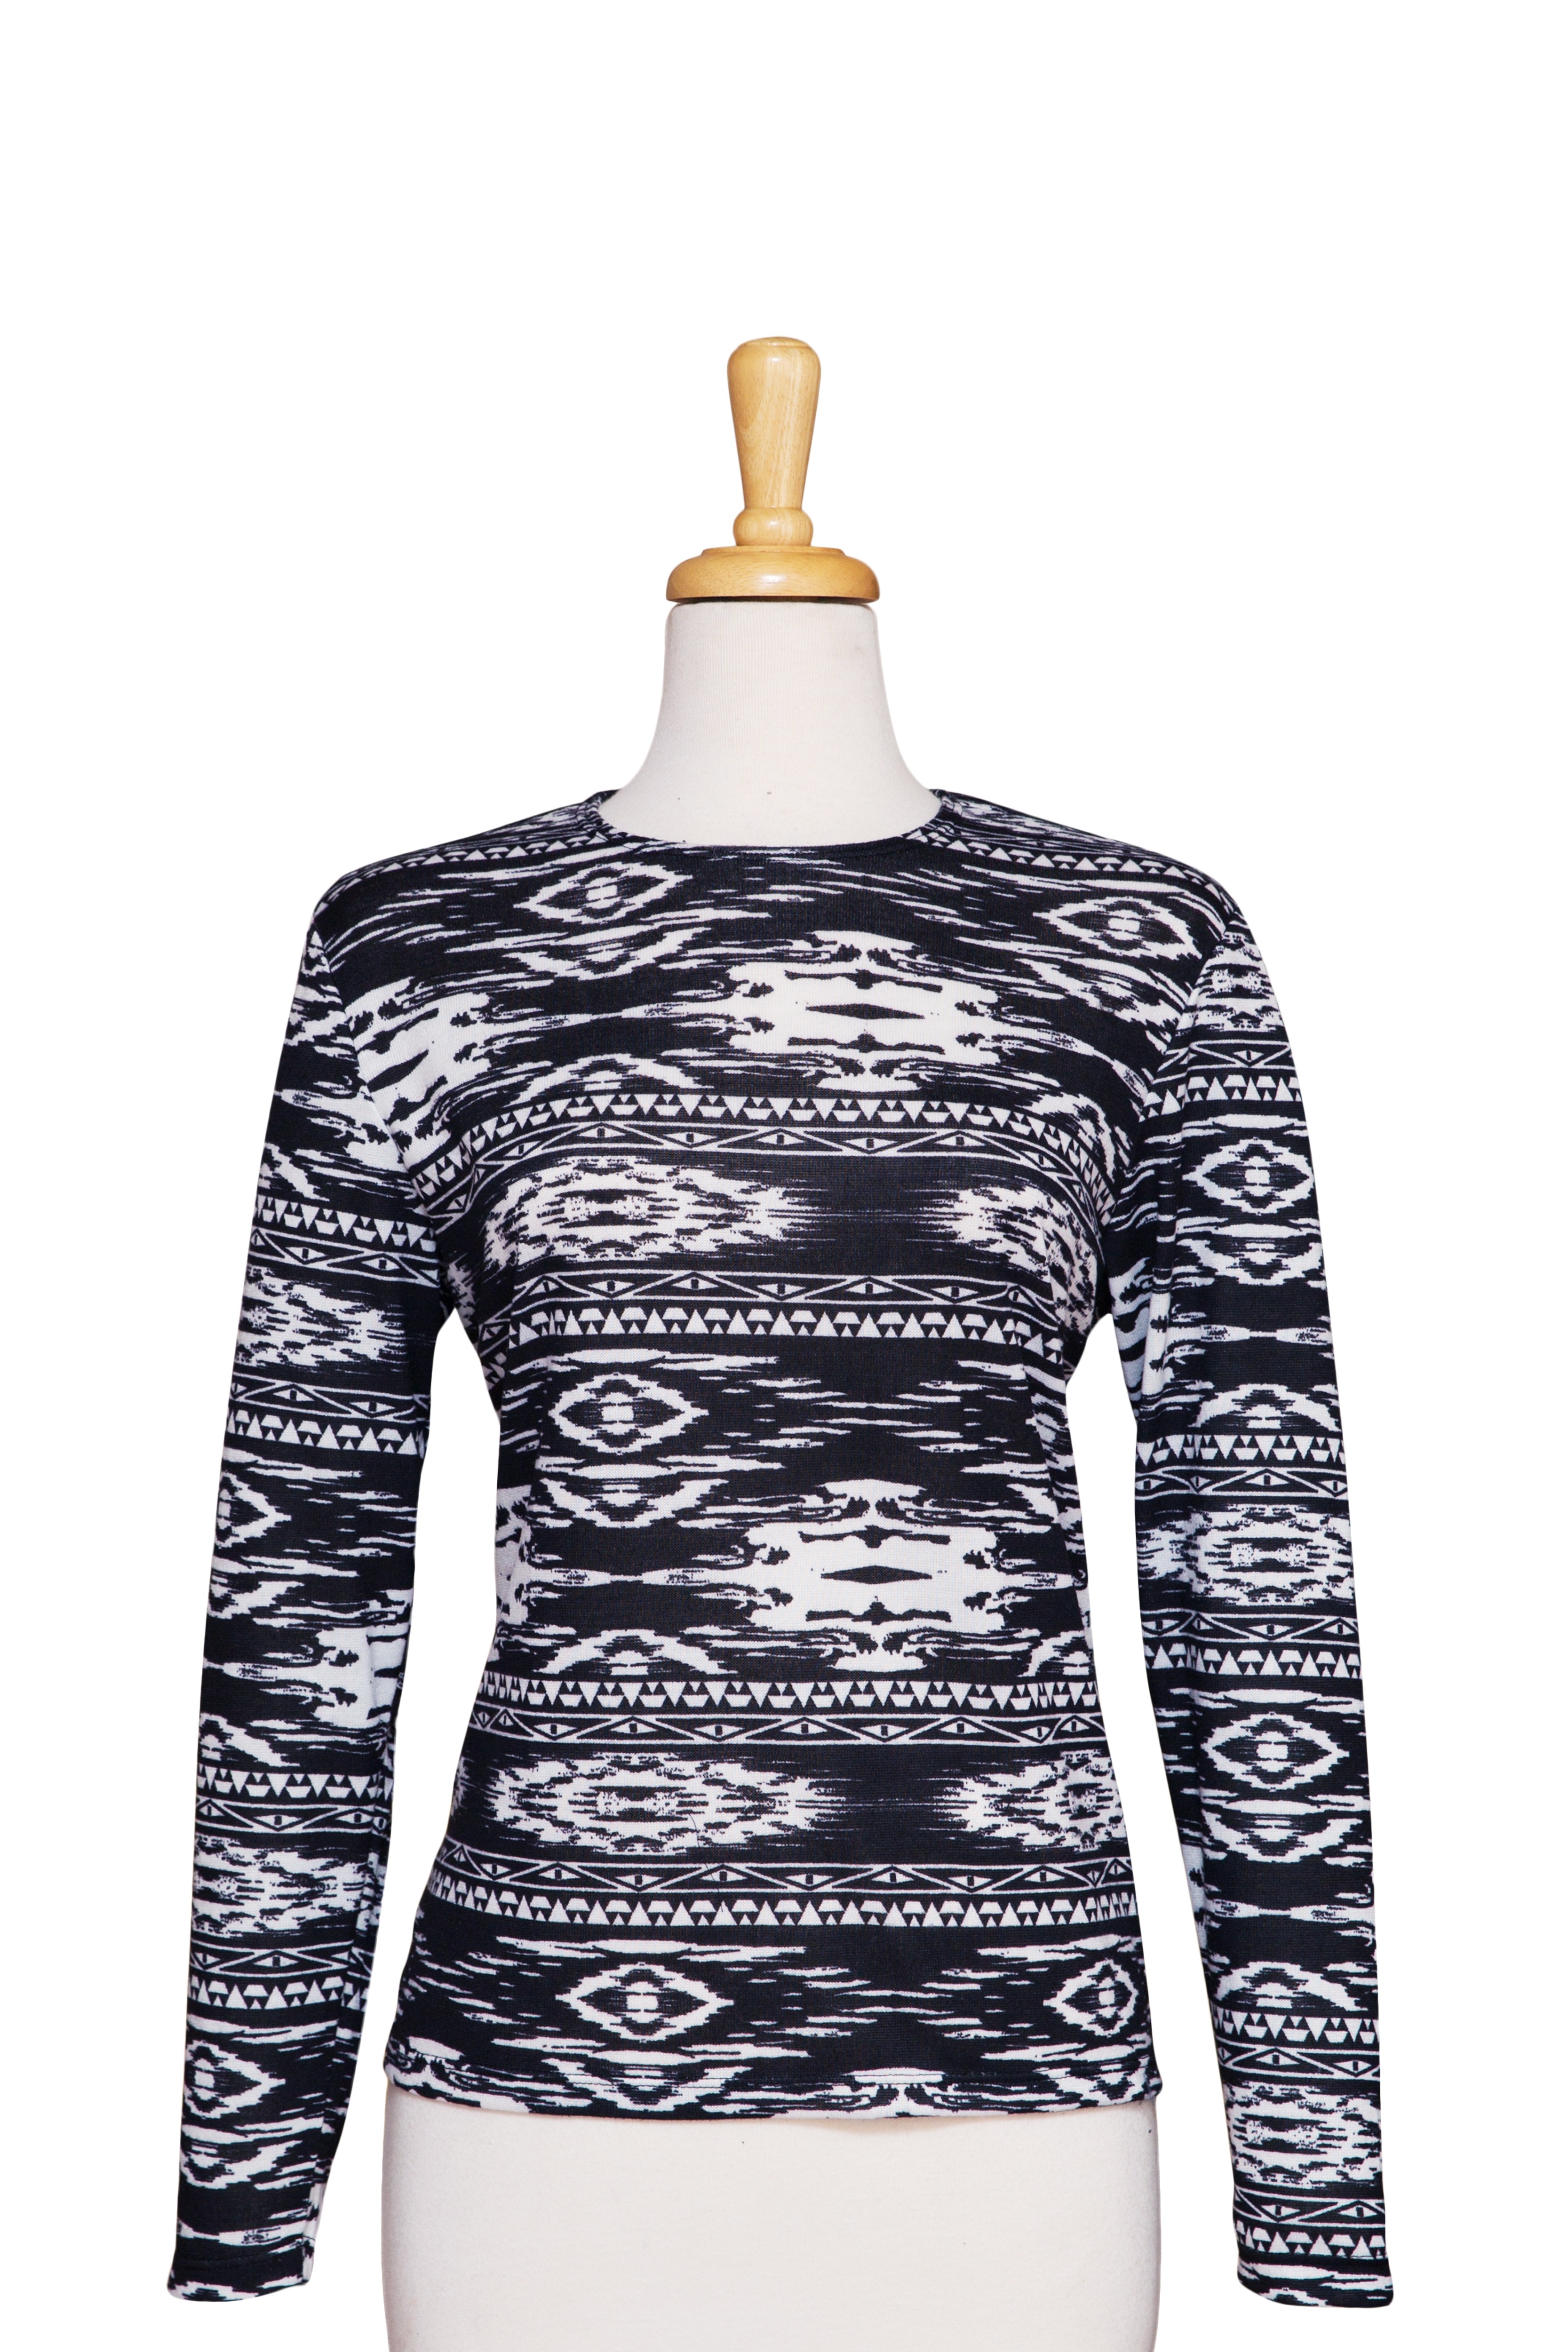 Plus Size Long Sleeve Black And Ivory Aztec Knit Top